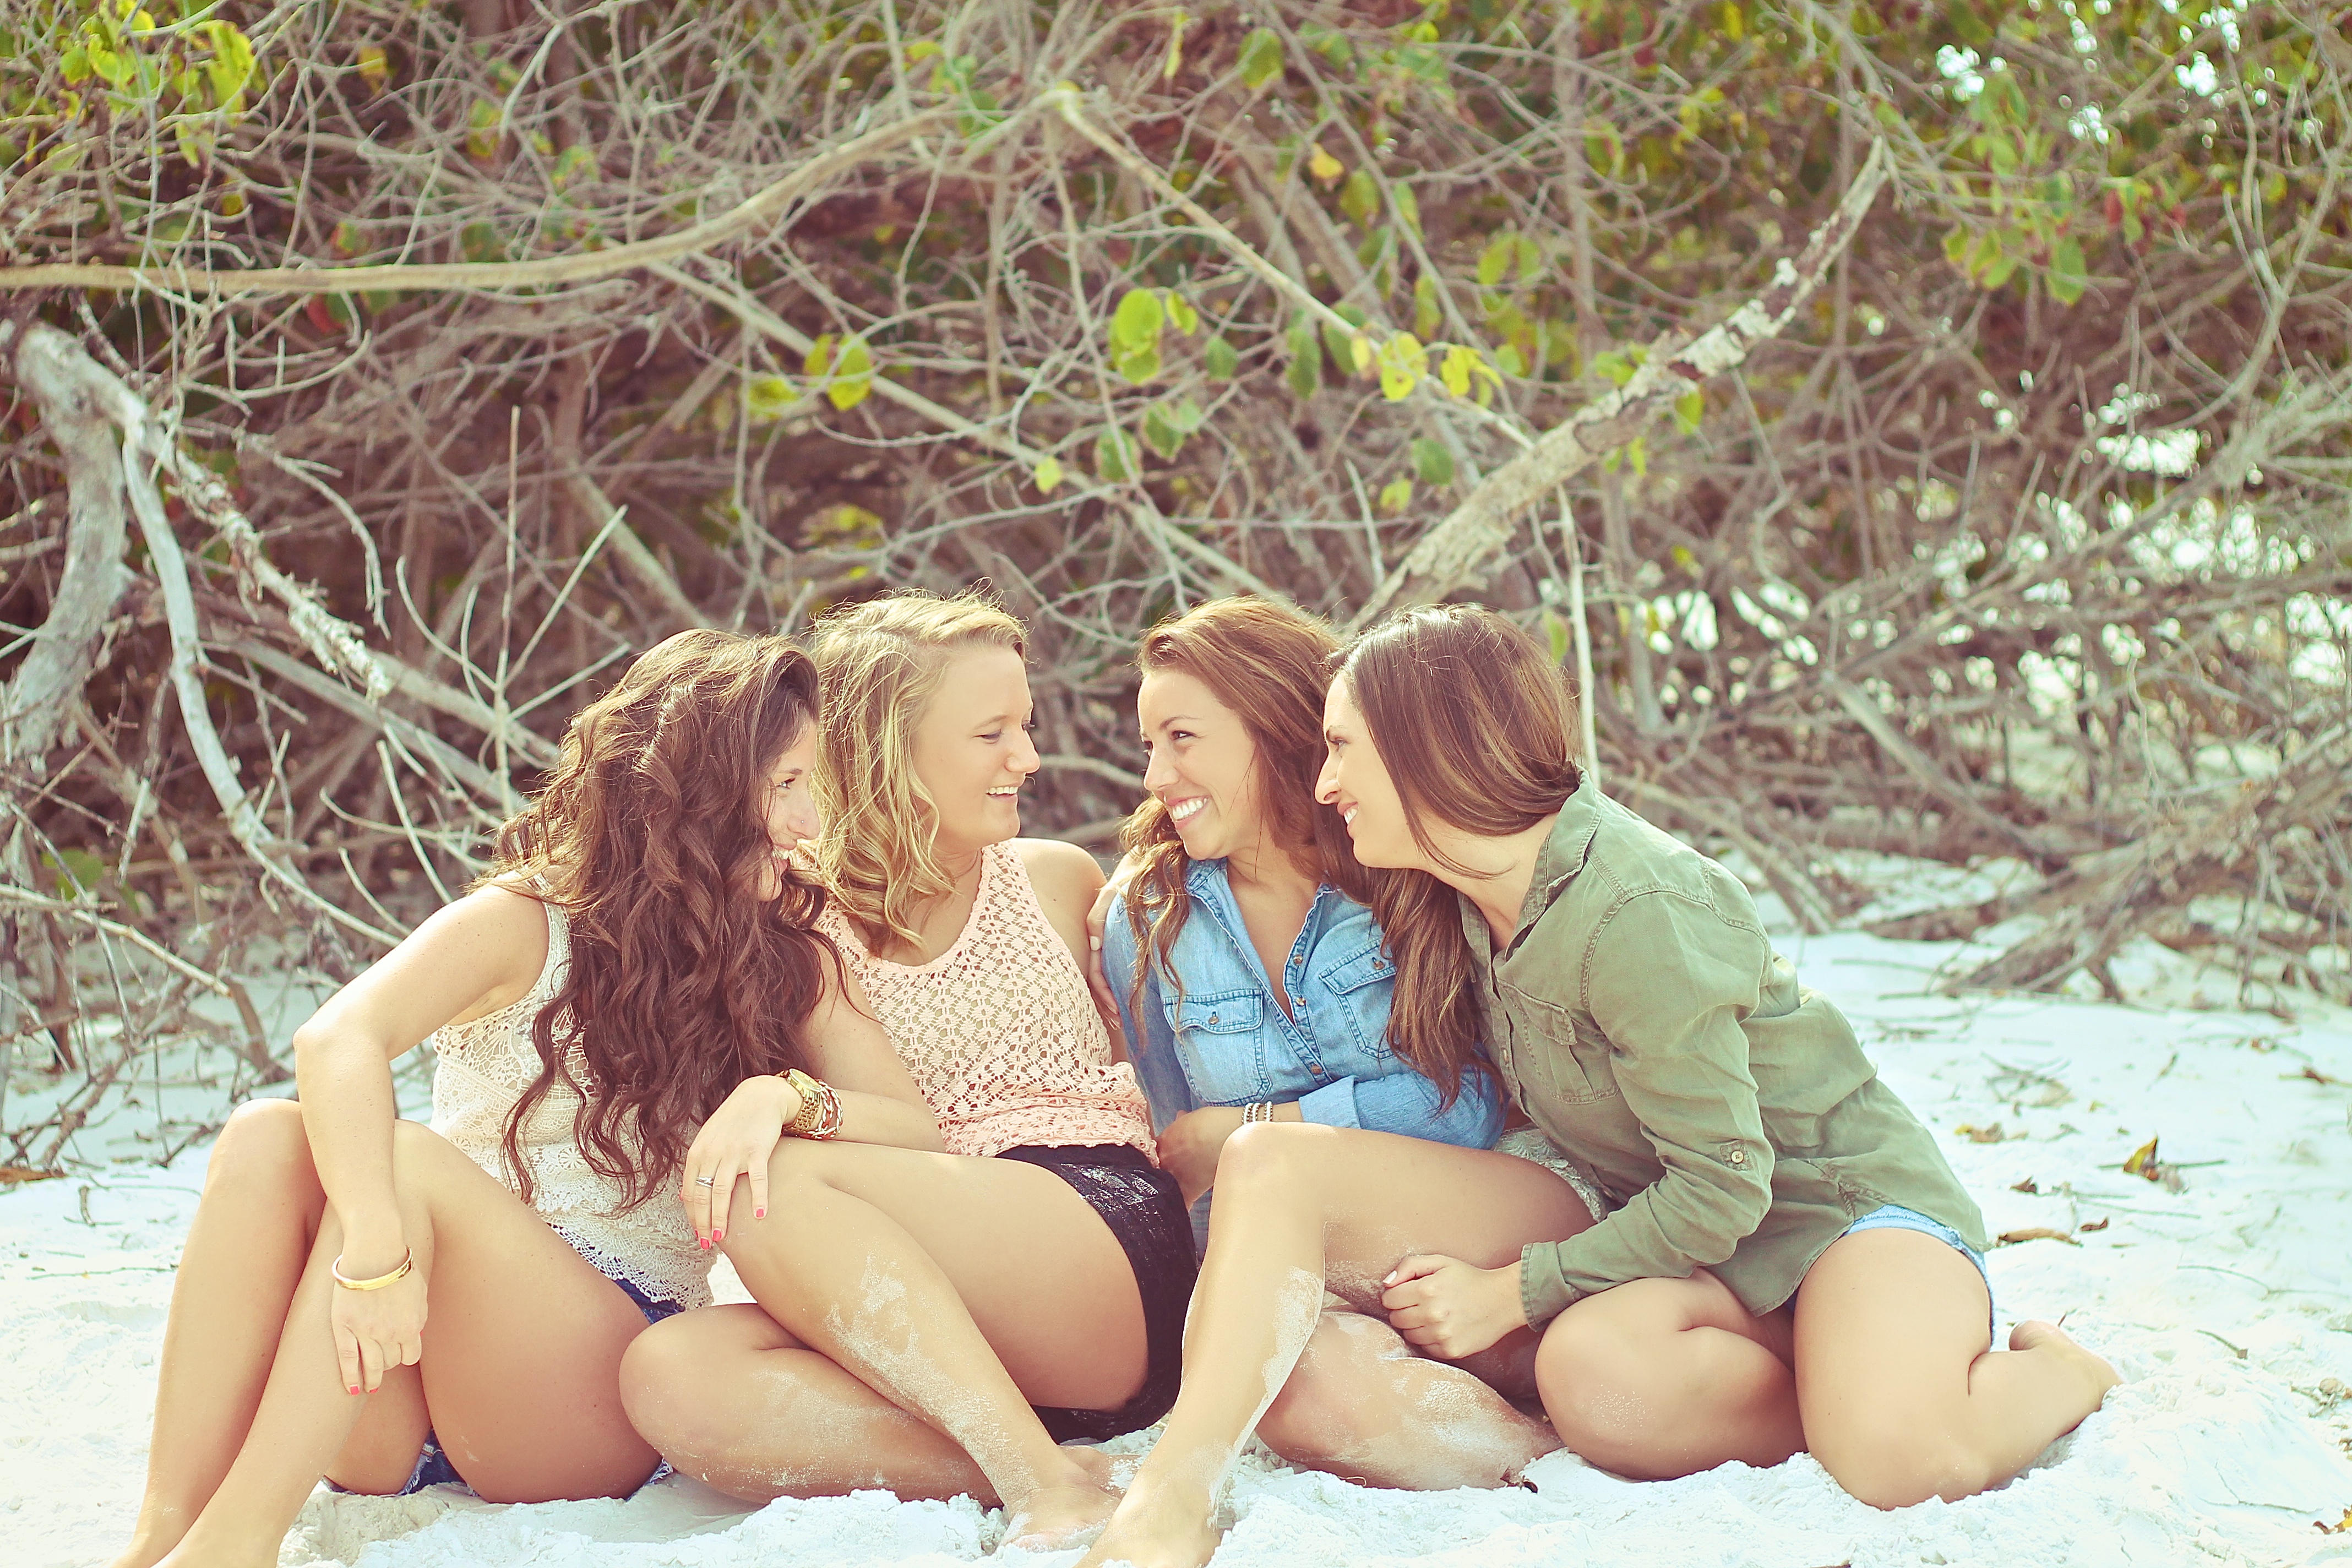 When I Was in High School I Made and Lost Friends | Smart Girls Group